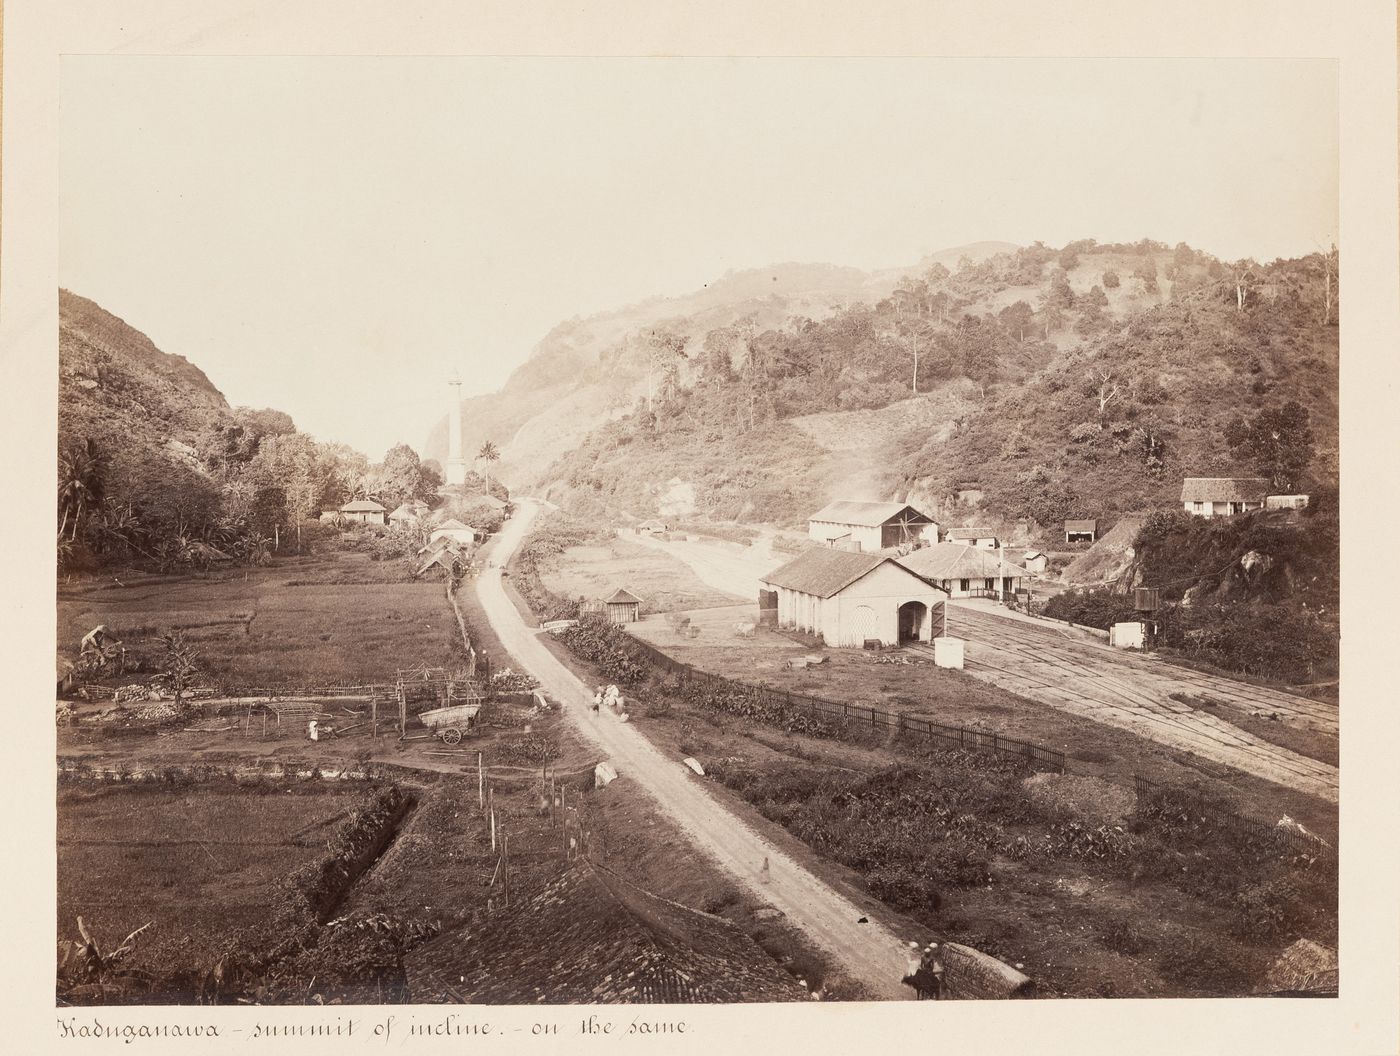 View of Kadugannawa showing a road and hills with the railroad station on the right and Captain Dawson's Monument in the background, Ceylon (now Sri Lanka)